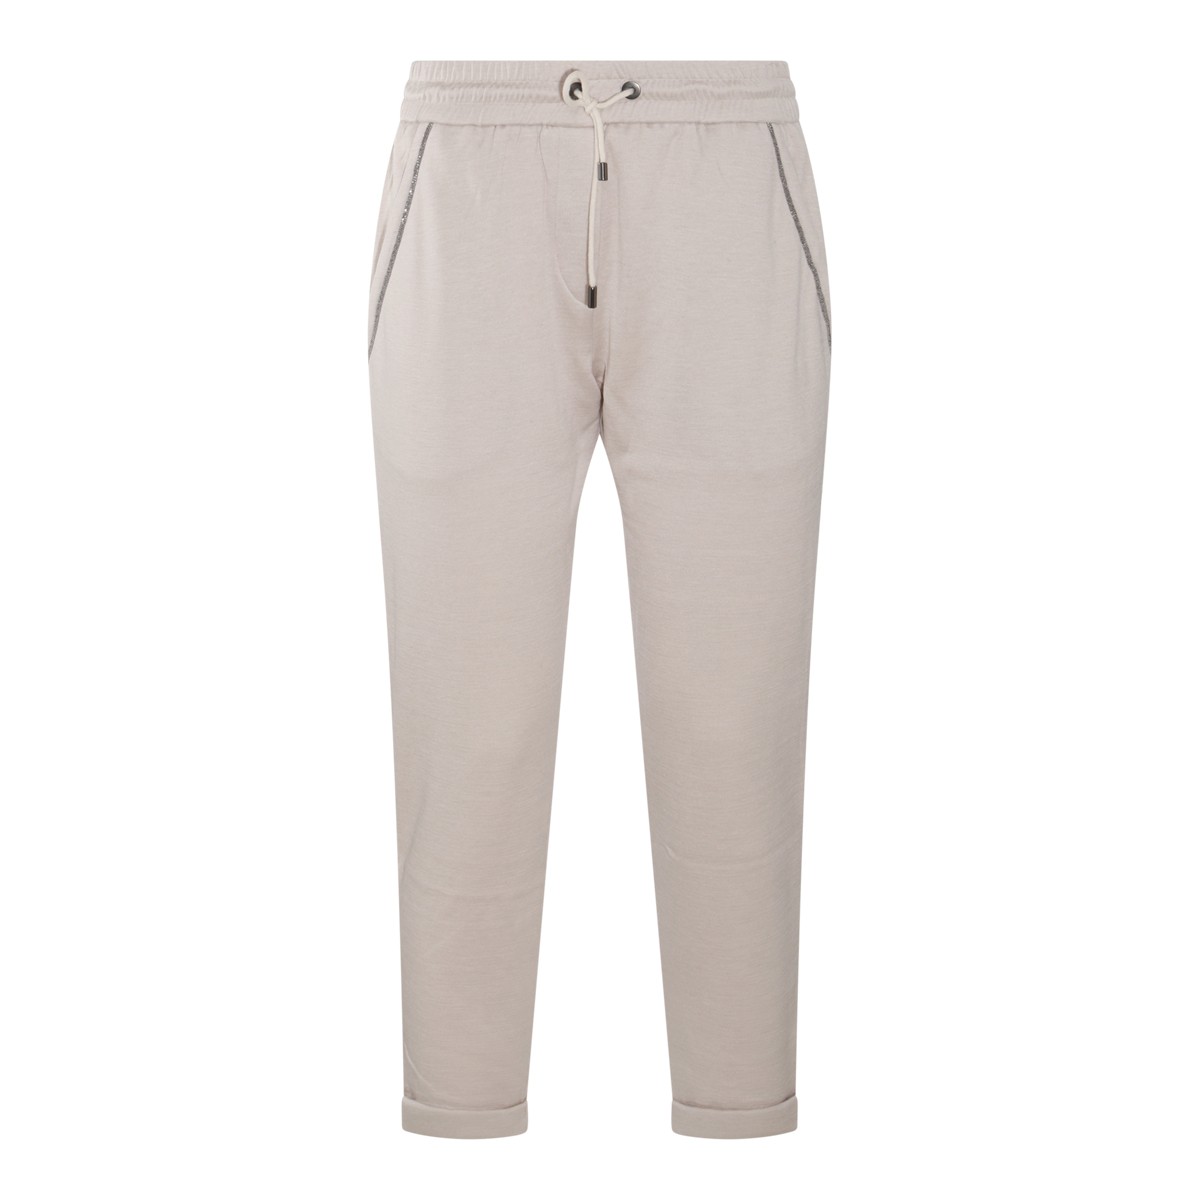 WARM WHITE COTTON AND SILK BLEND TRACK PANTS